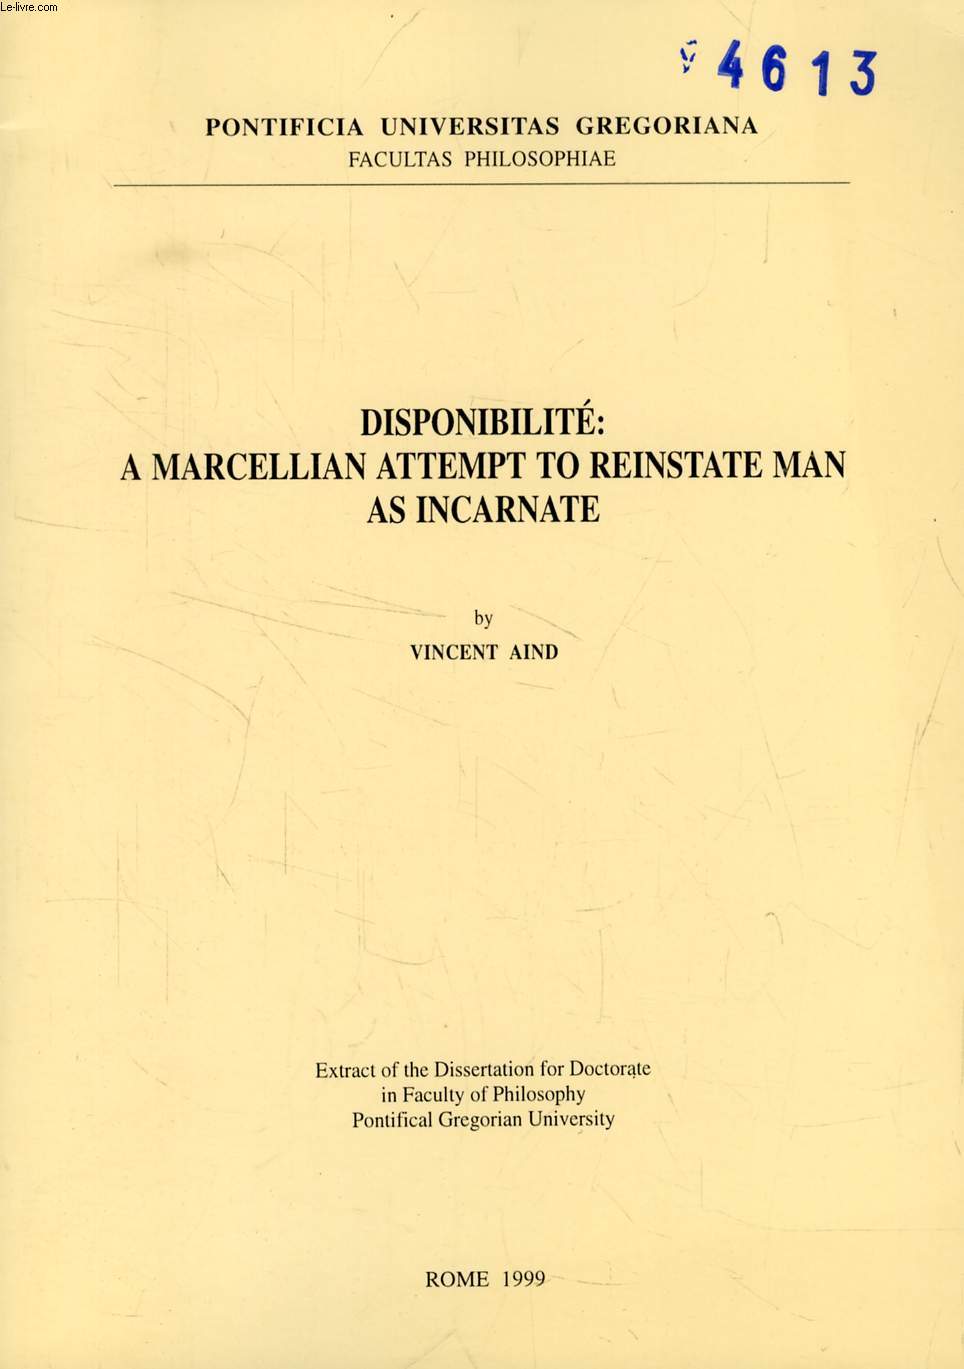 DISPONIBILITE: A MARCELLIAN ATTEMPT TO REINSTATE MAN AS INCARNATE (EXTRACT OF THE DISSERTATION)